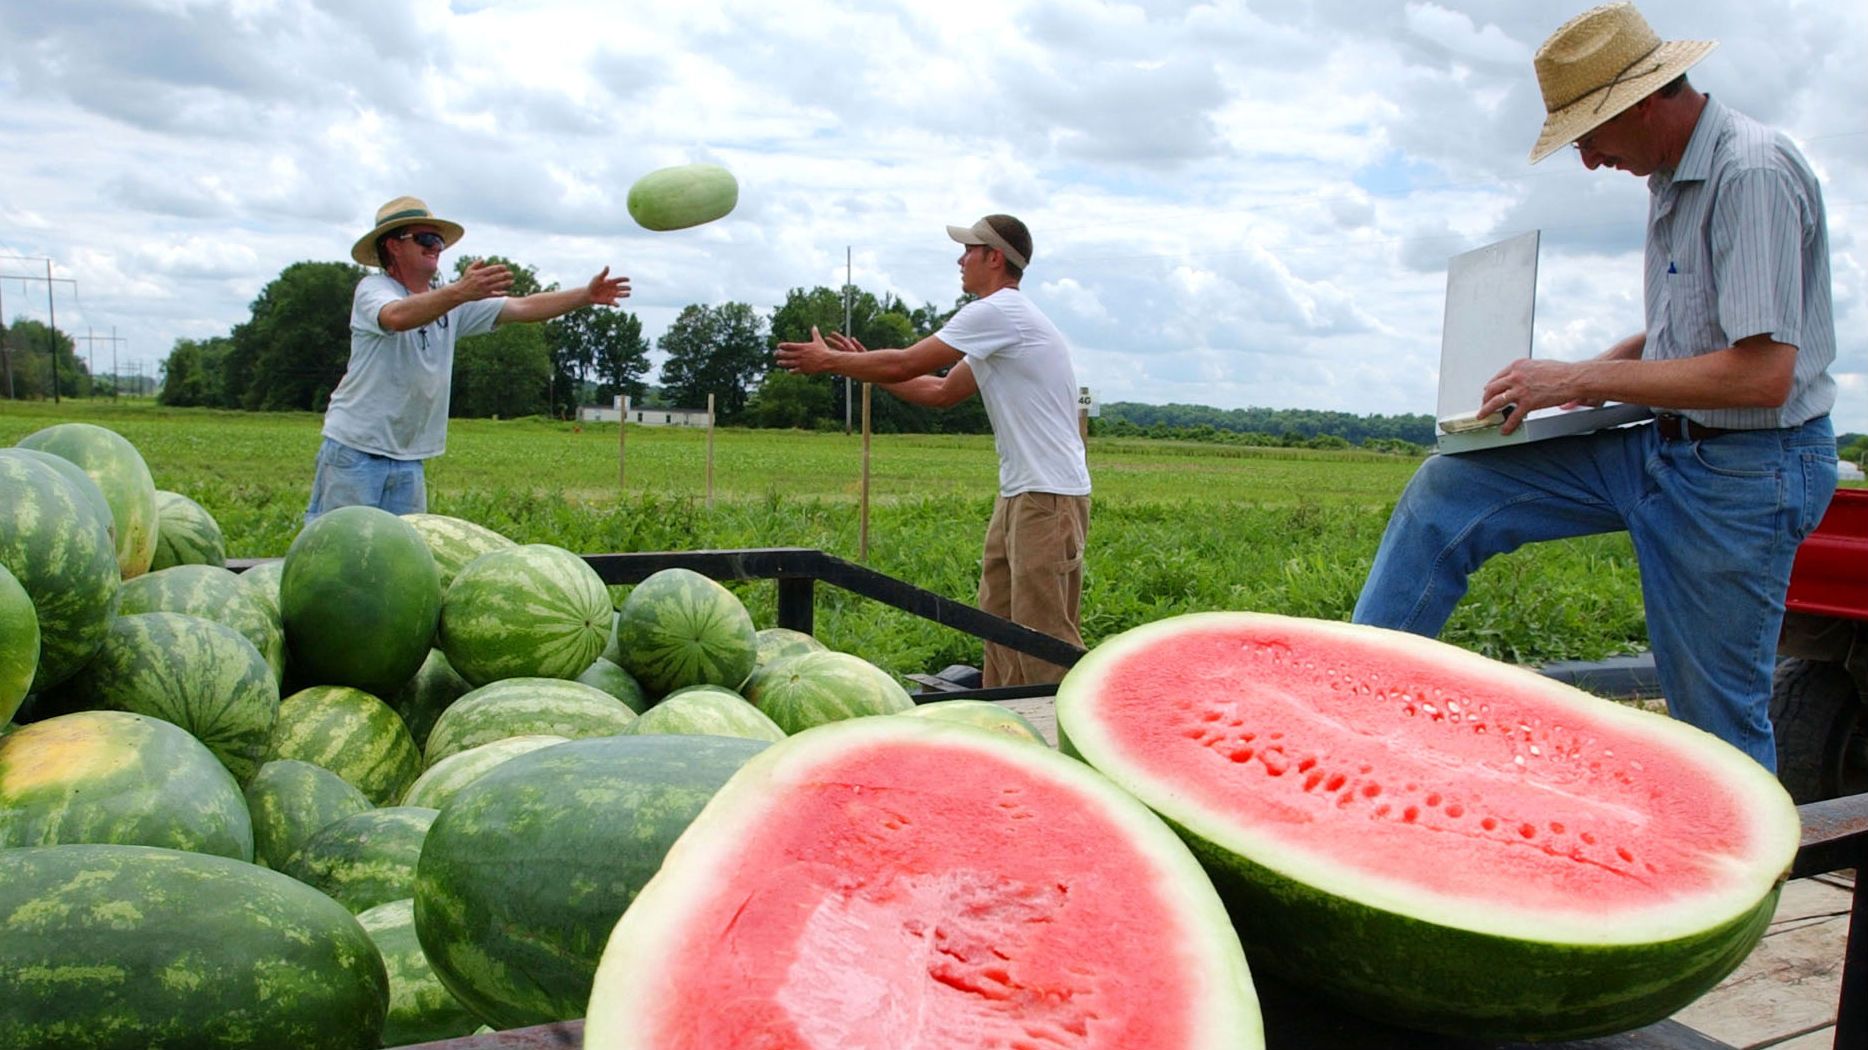 Let's get real about seedless watermelons: They have seeds — Quartz